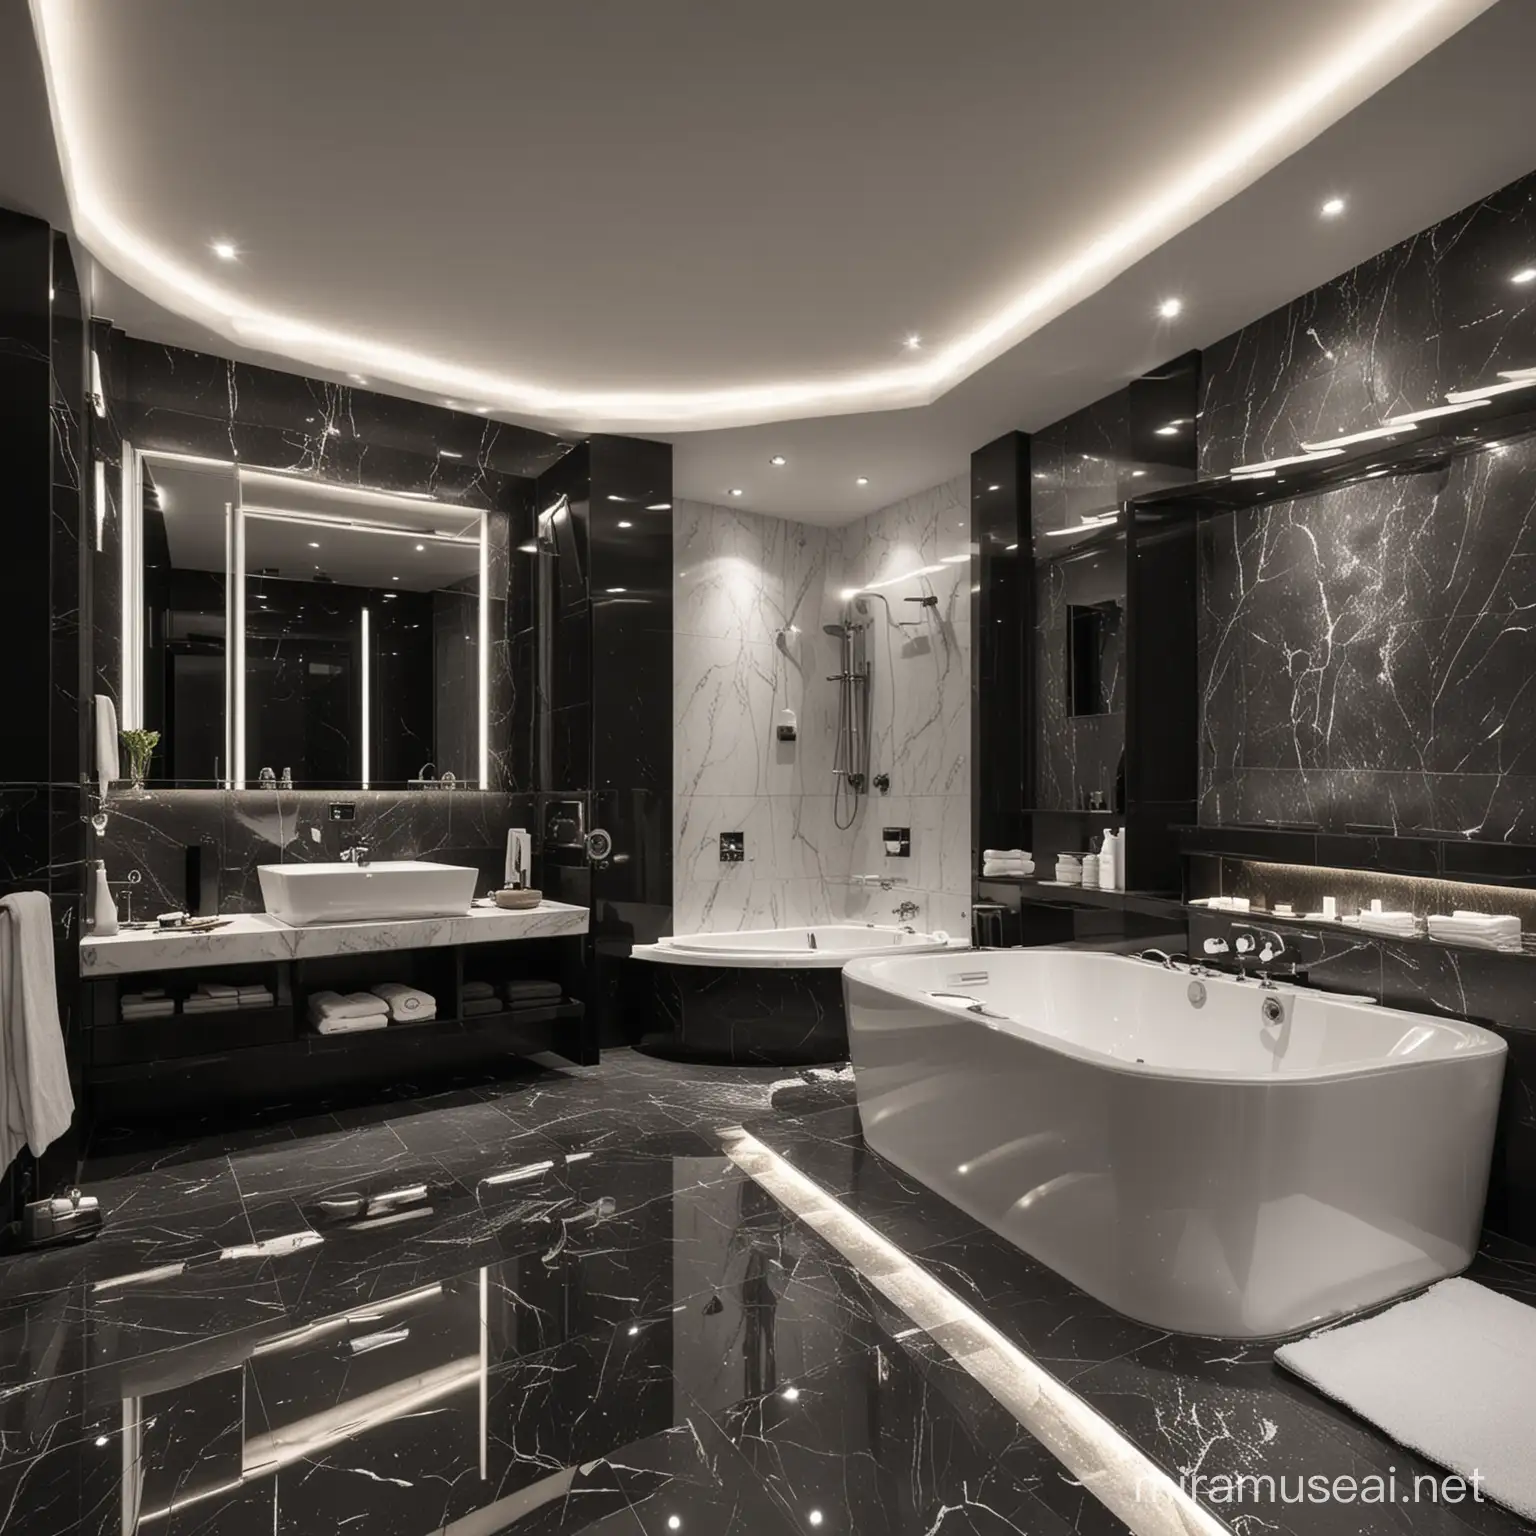 Luxurious Black and White Bathroom with Jacuzzi at Night